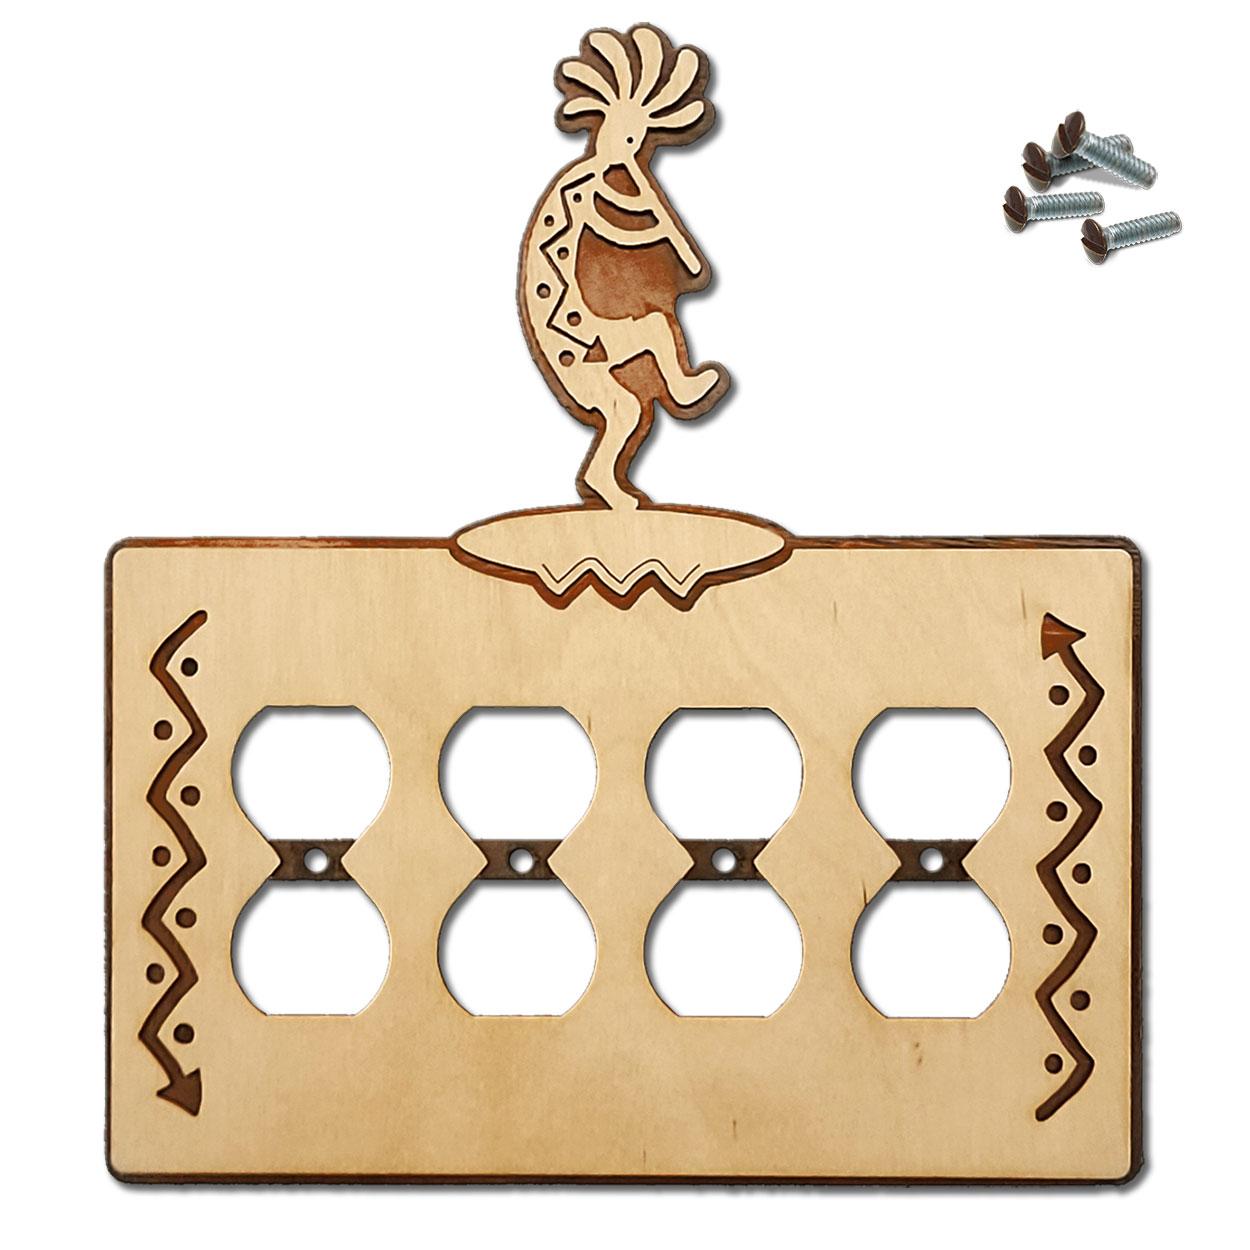 167617 -  Dancing Kokopelli Southwestern Decor Quad Outlet Cover in Natural Birch